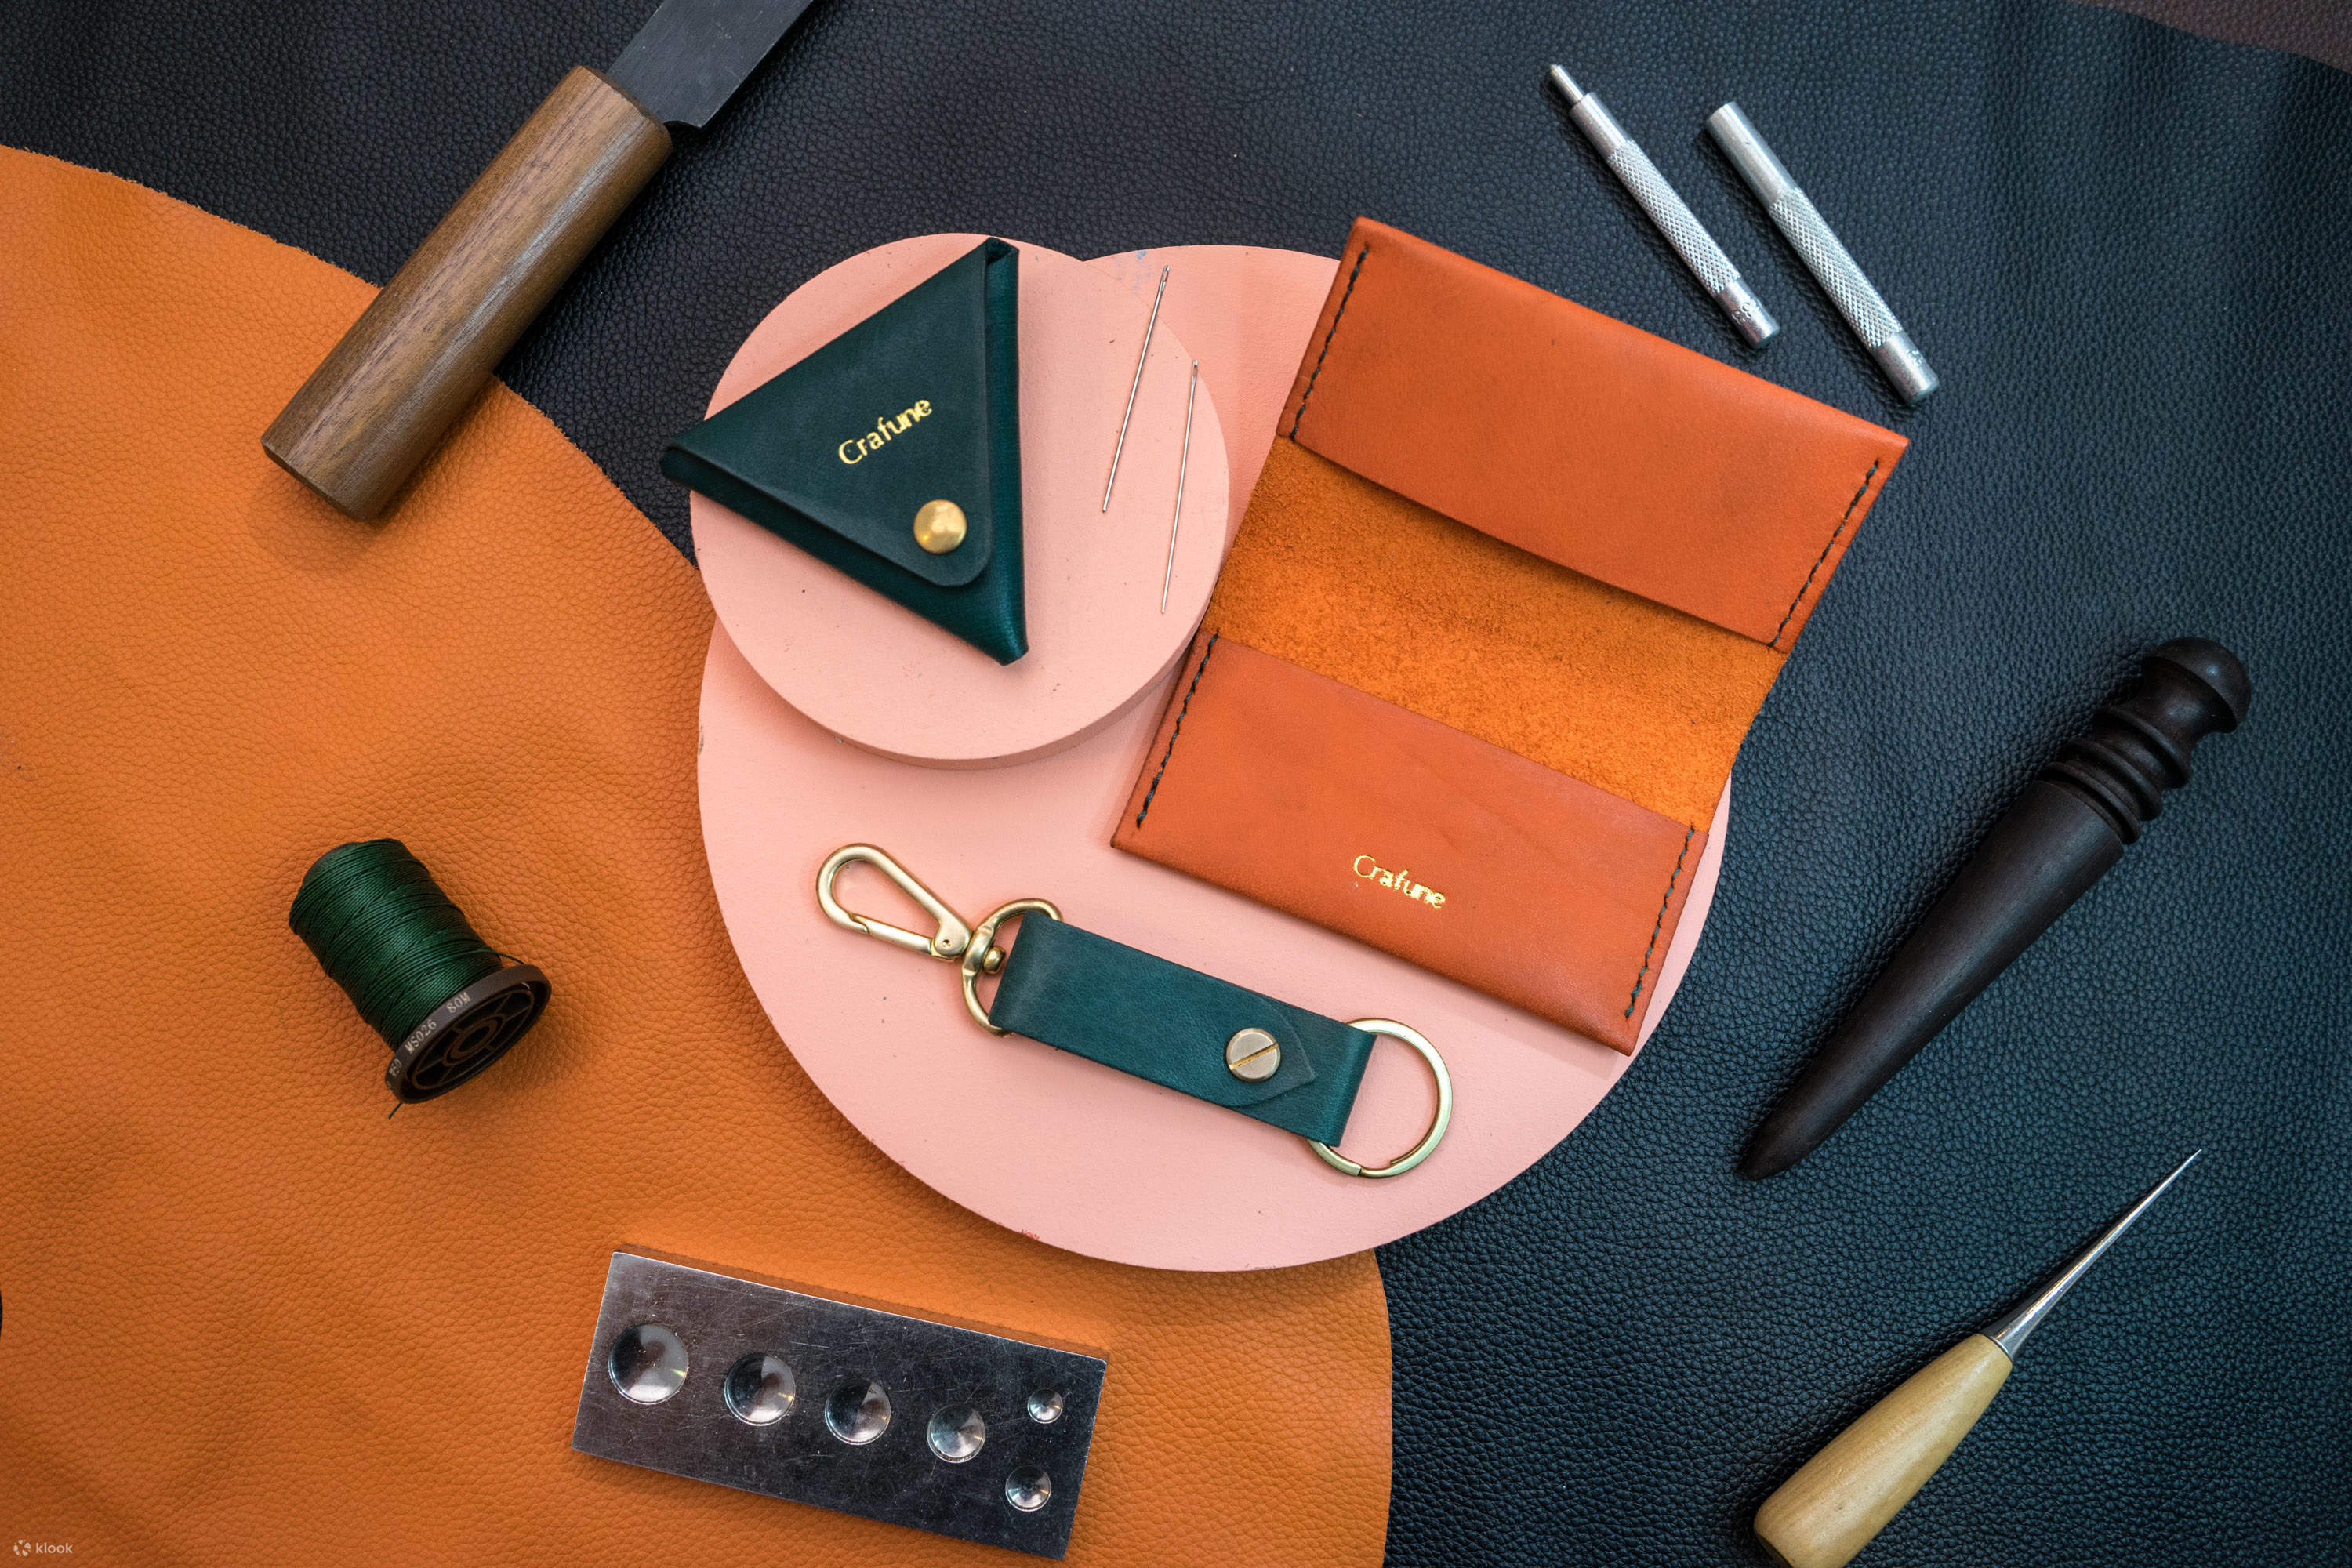 Cardholder, Wallet & Accessories Leather Workshop Or Diy Kit Delivery in  Singapore - Klook United States